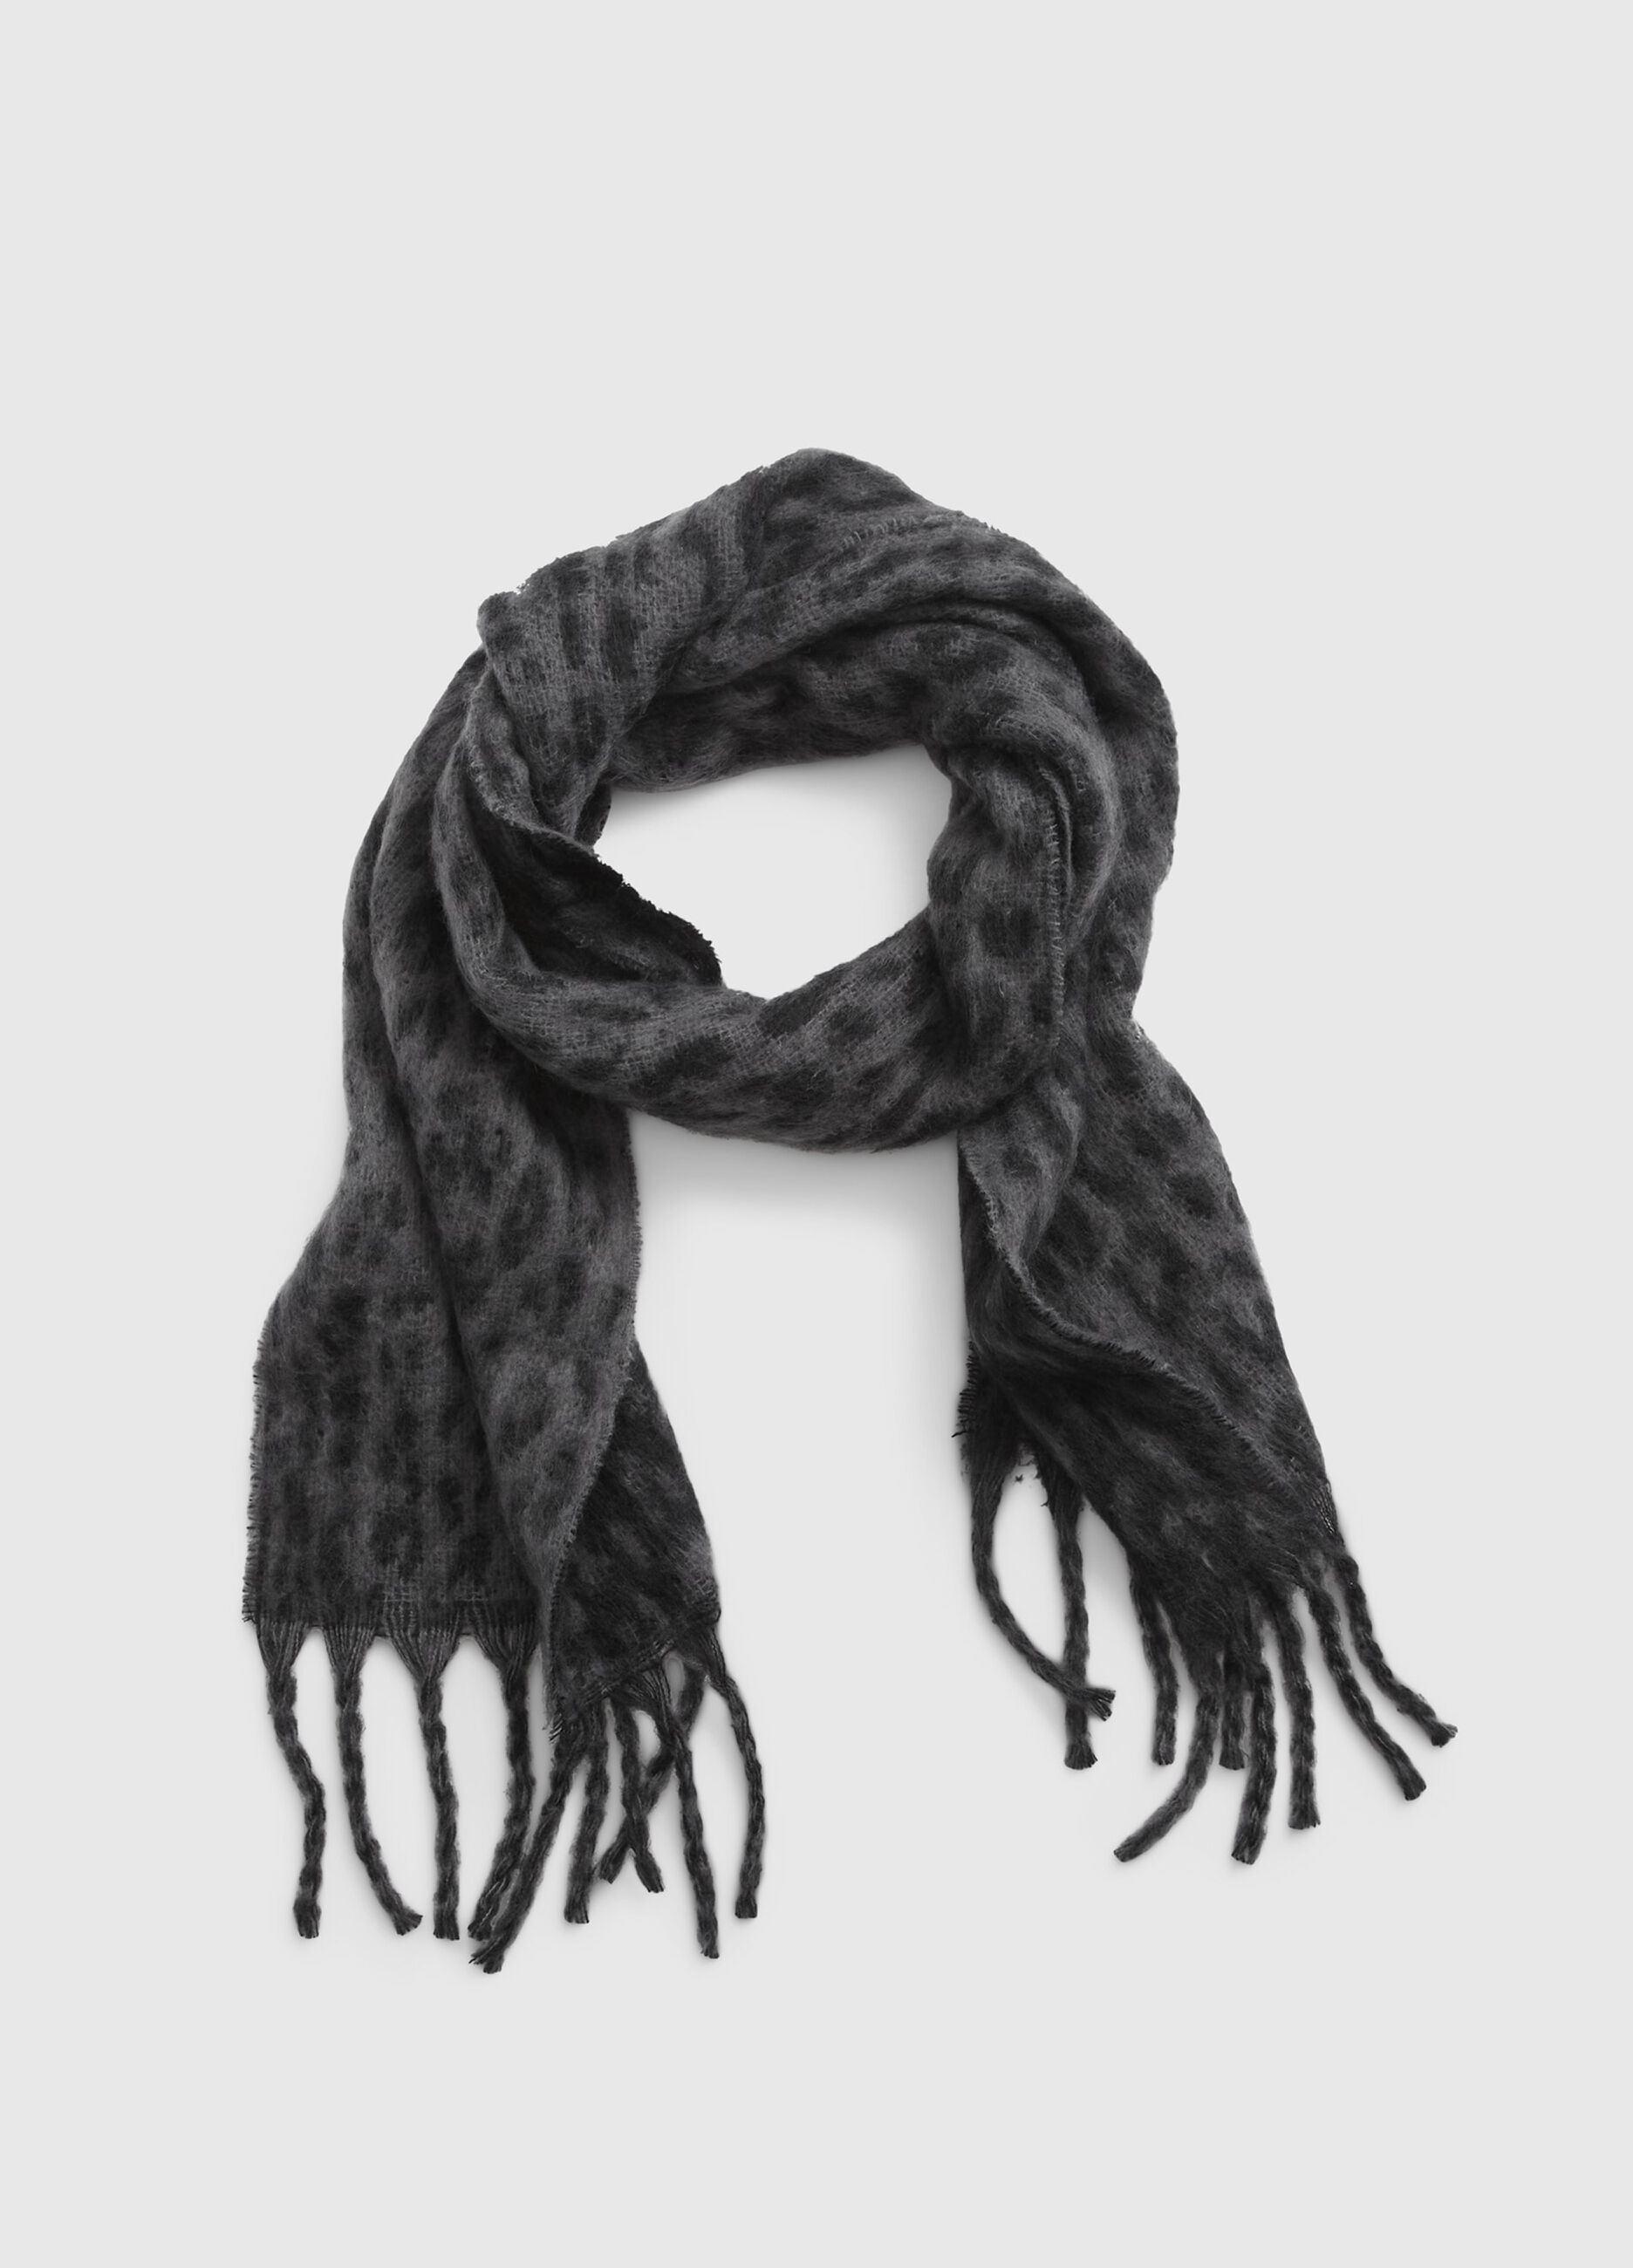 Animal print scarf with fringe on ends